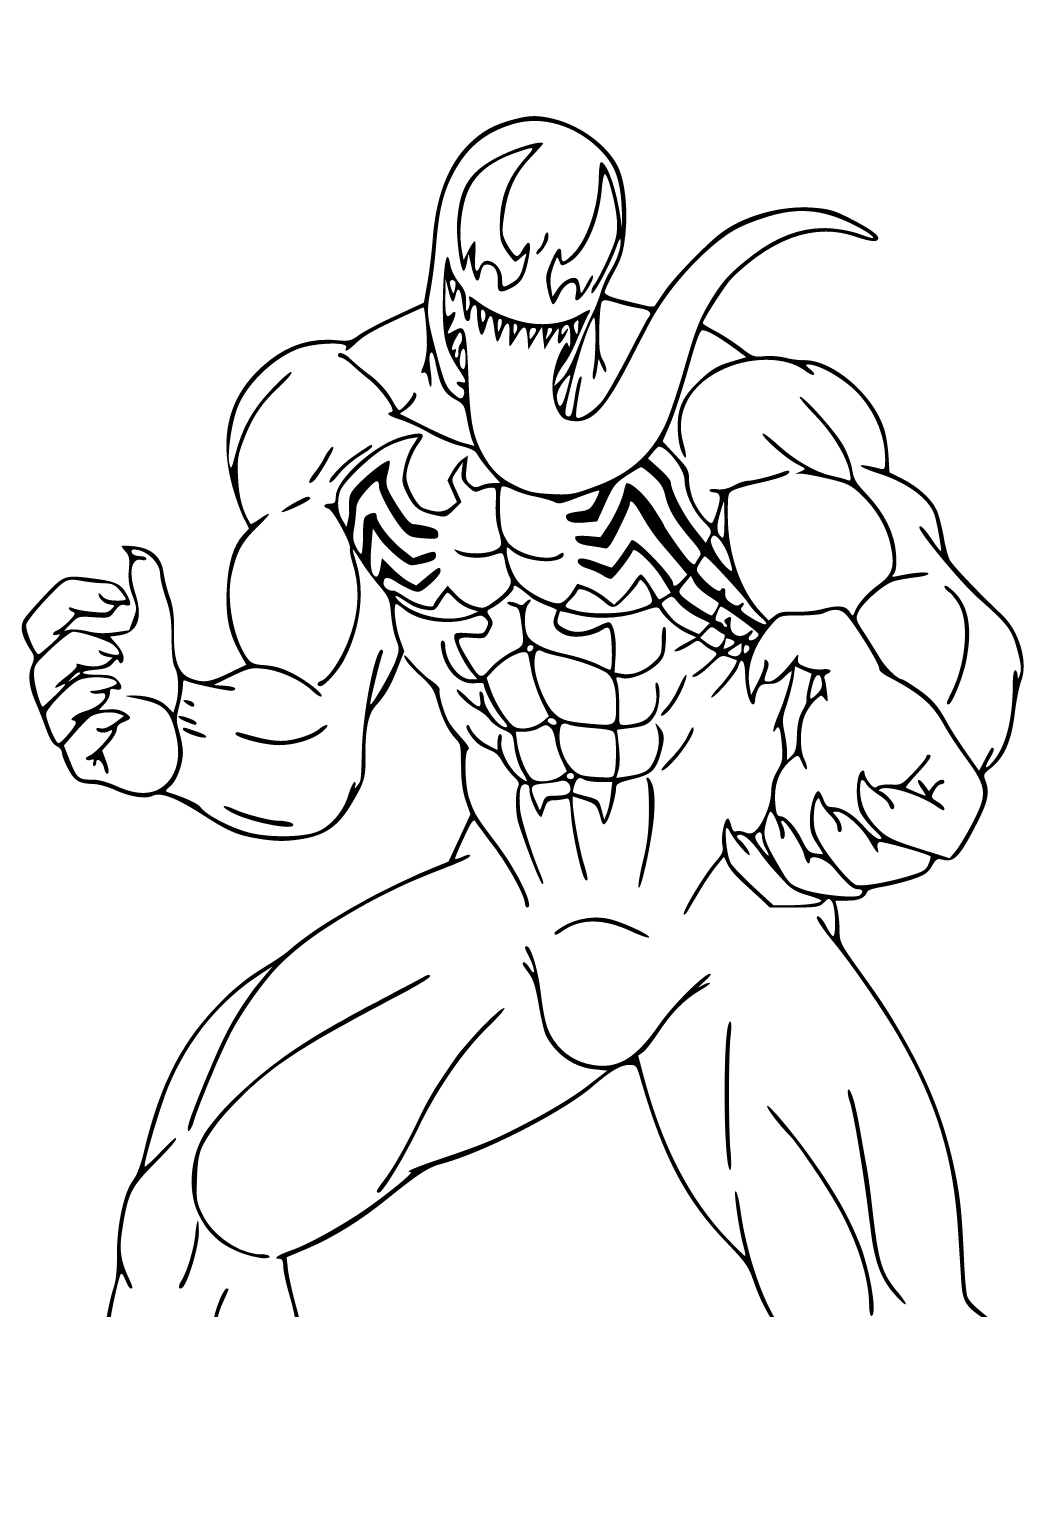 Free Printable Venom Hero Coloring Page for Adults and Kids - Lystok.com